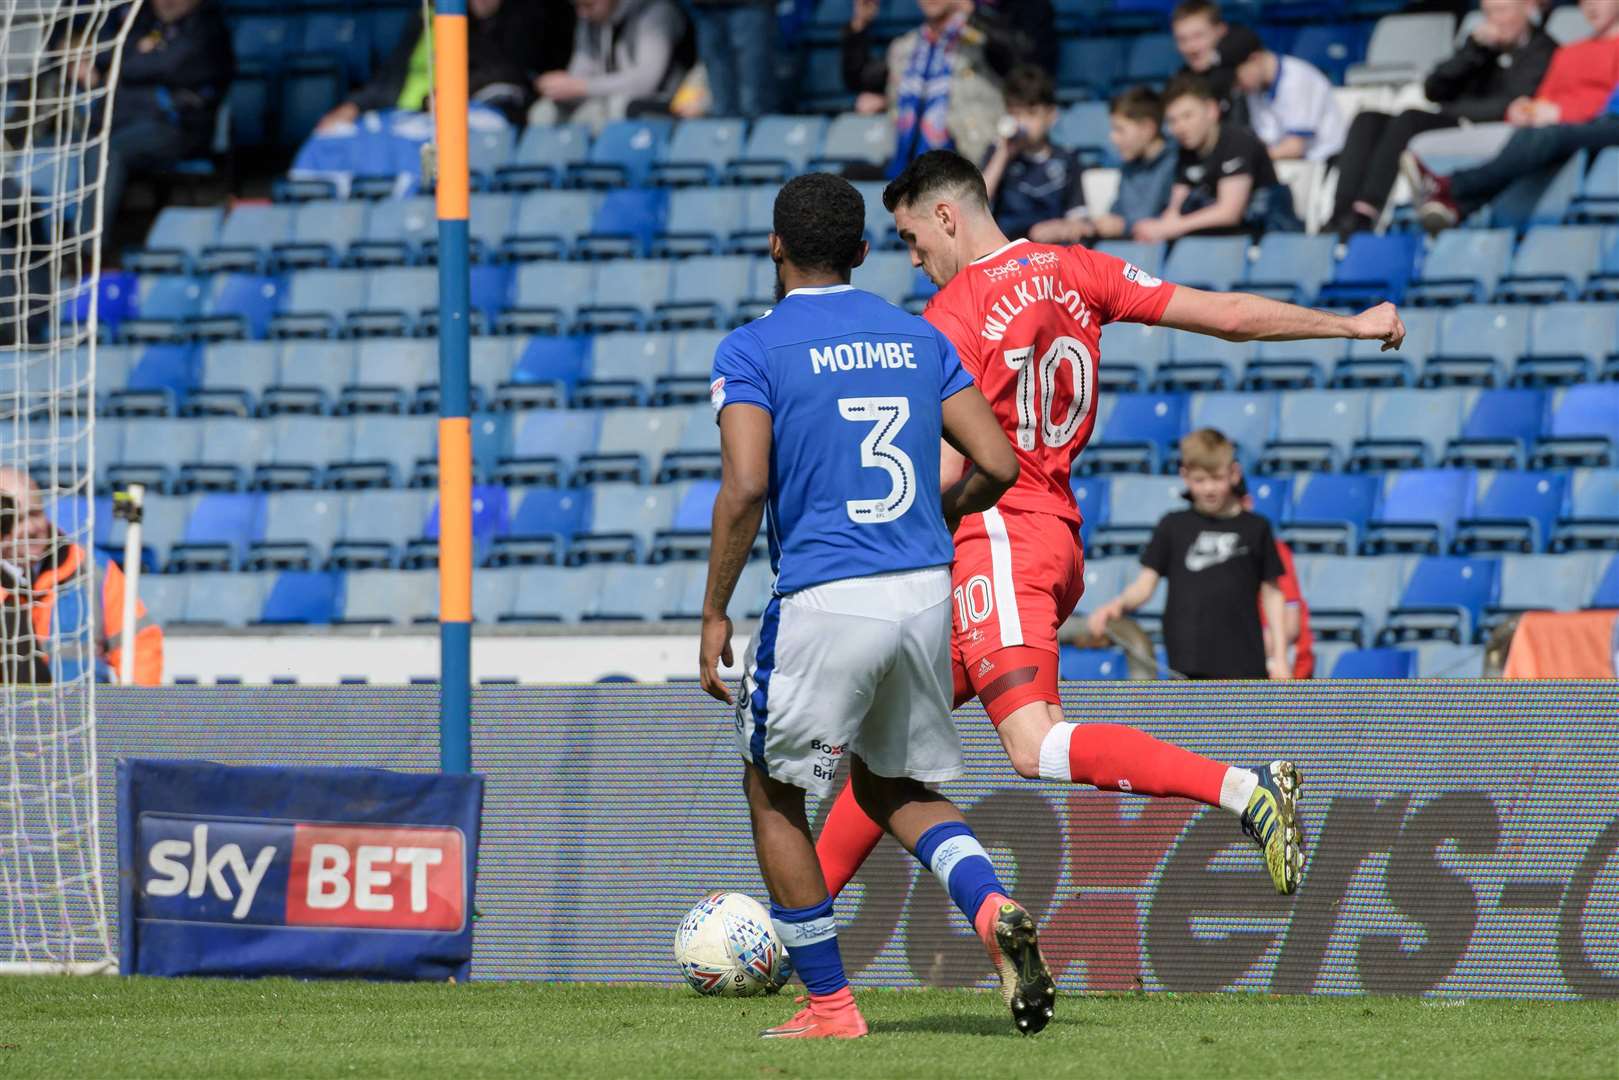 Conor Wilkinson shoots at goal but is denied Picture: Andy Payton